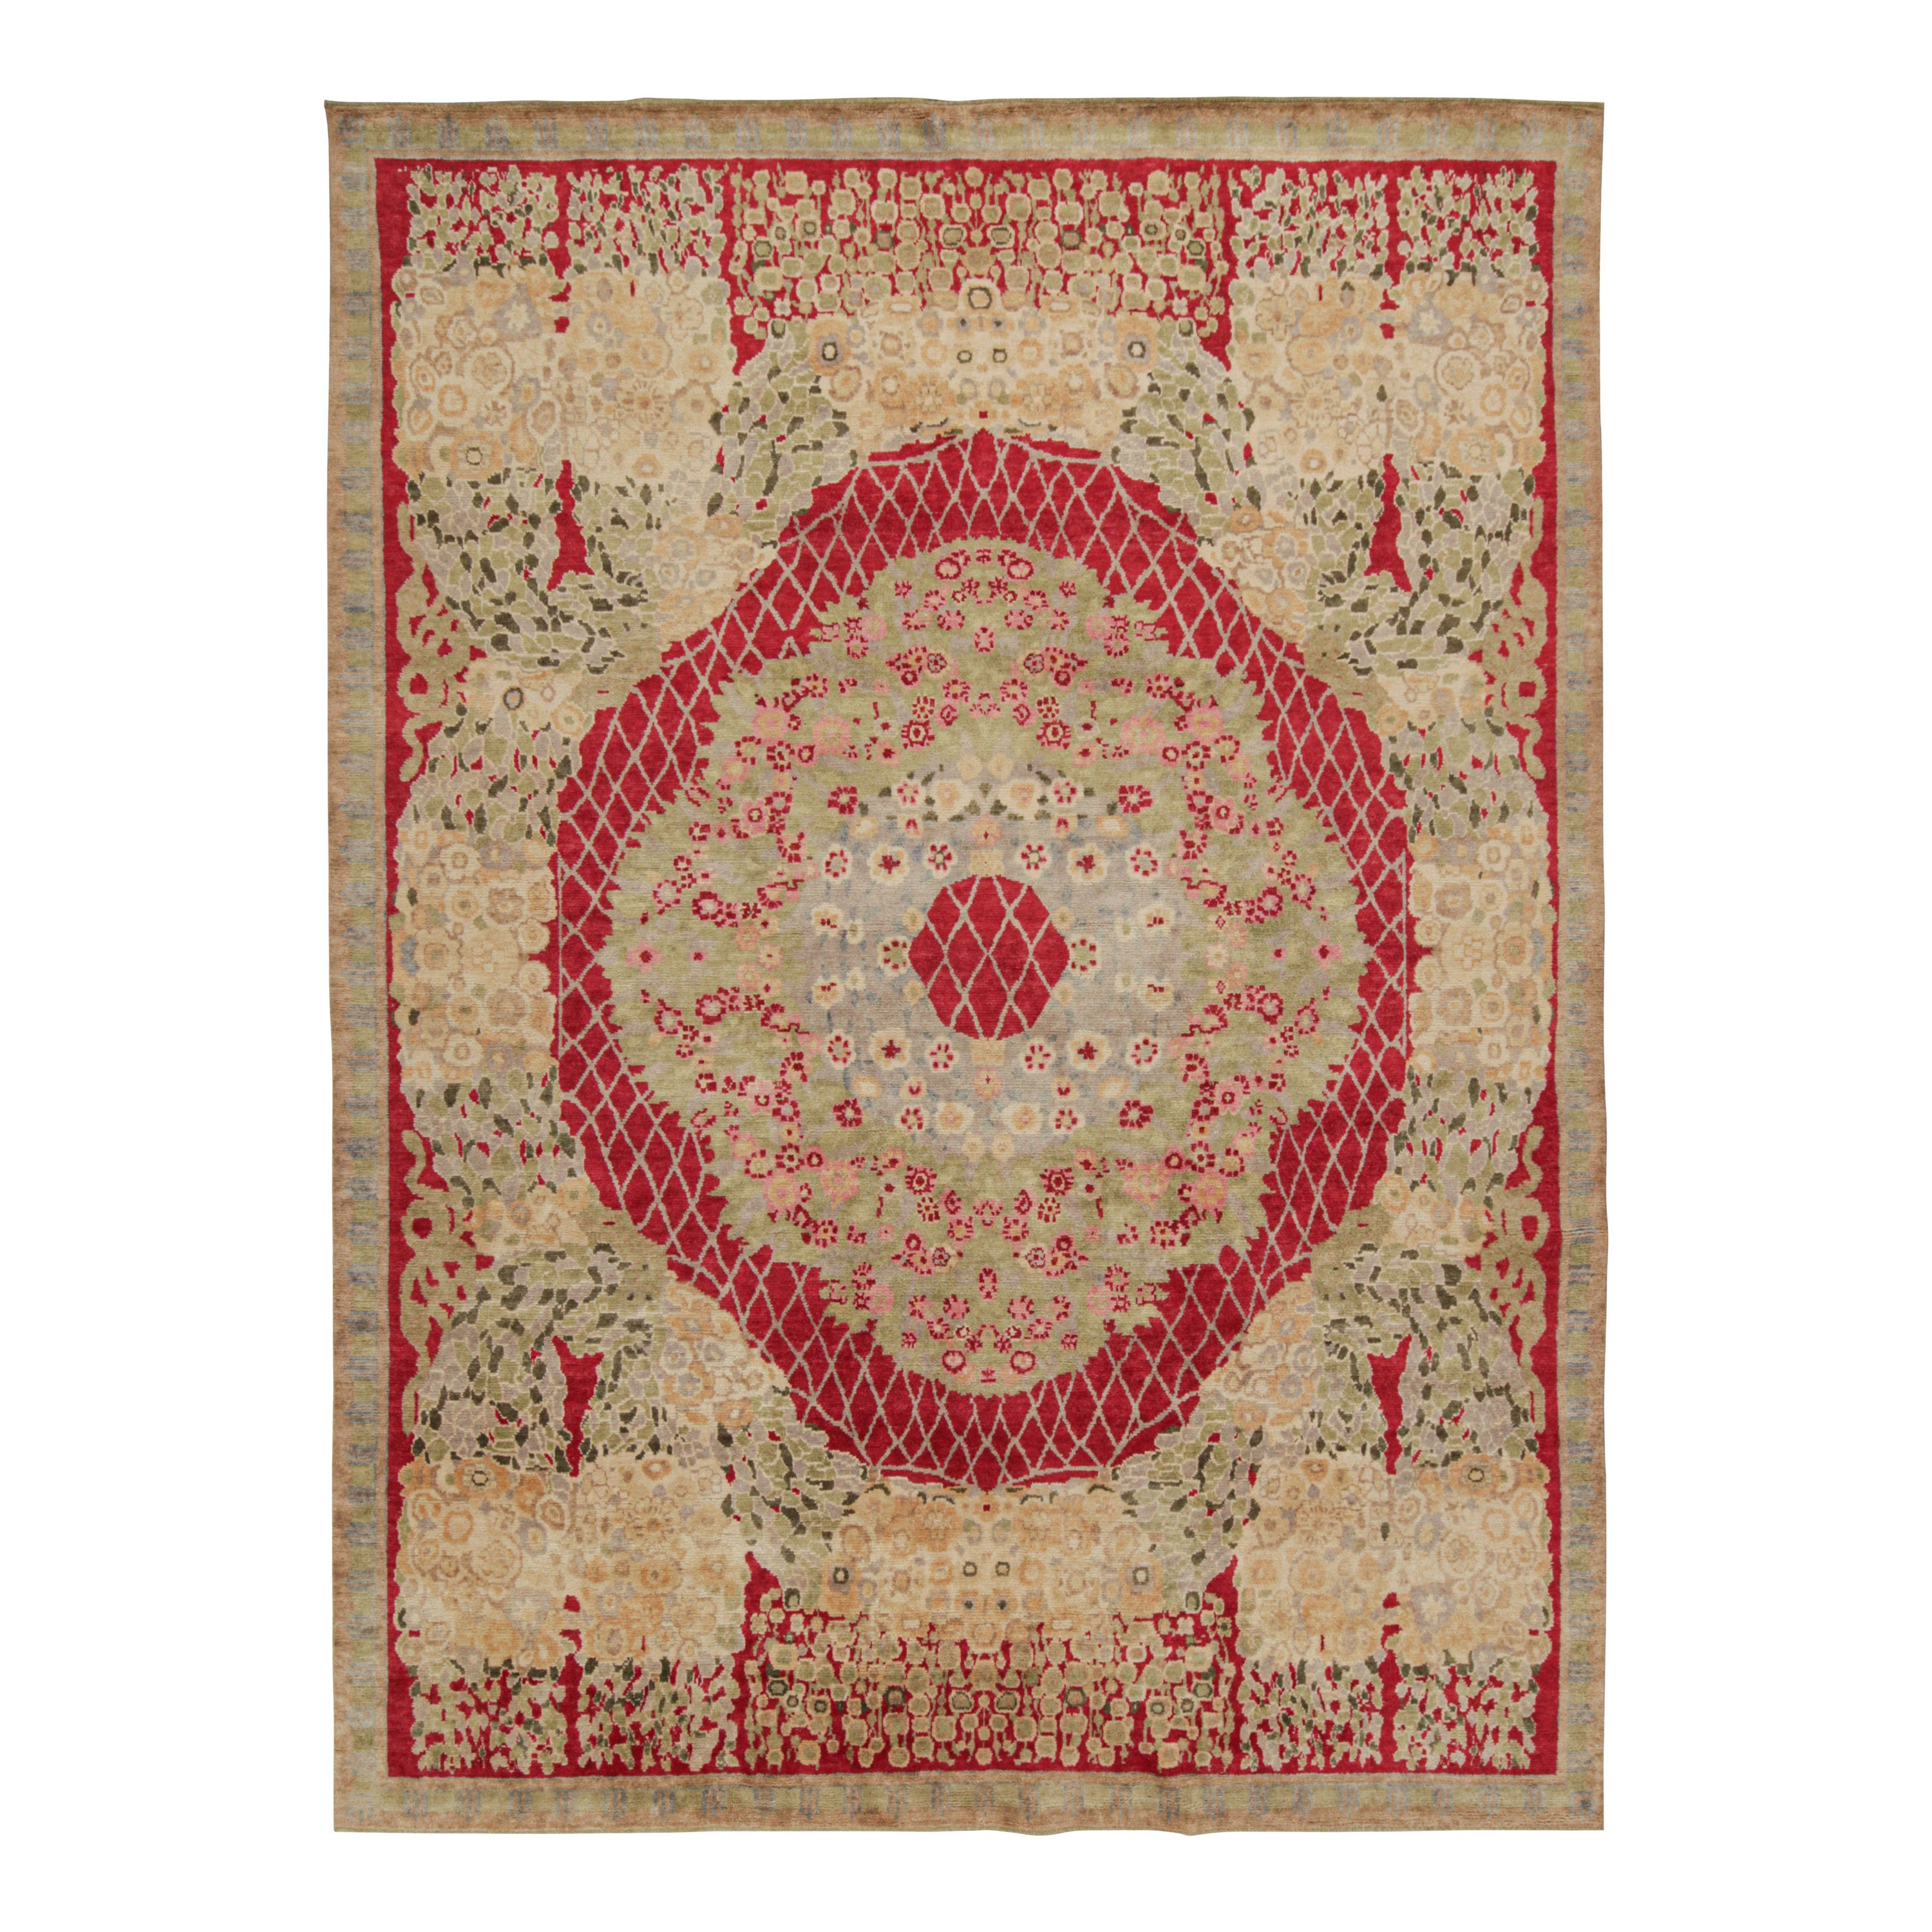 Rug & Kilim’s French Style Art Deco Rug in Red, Green, Gold & Blue Patterns For Sale